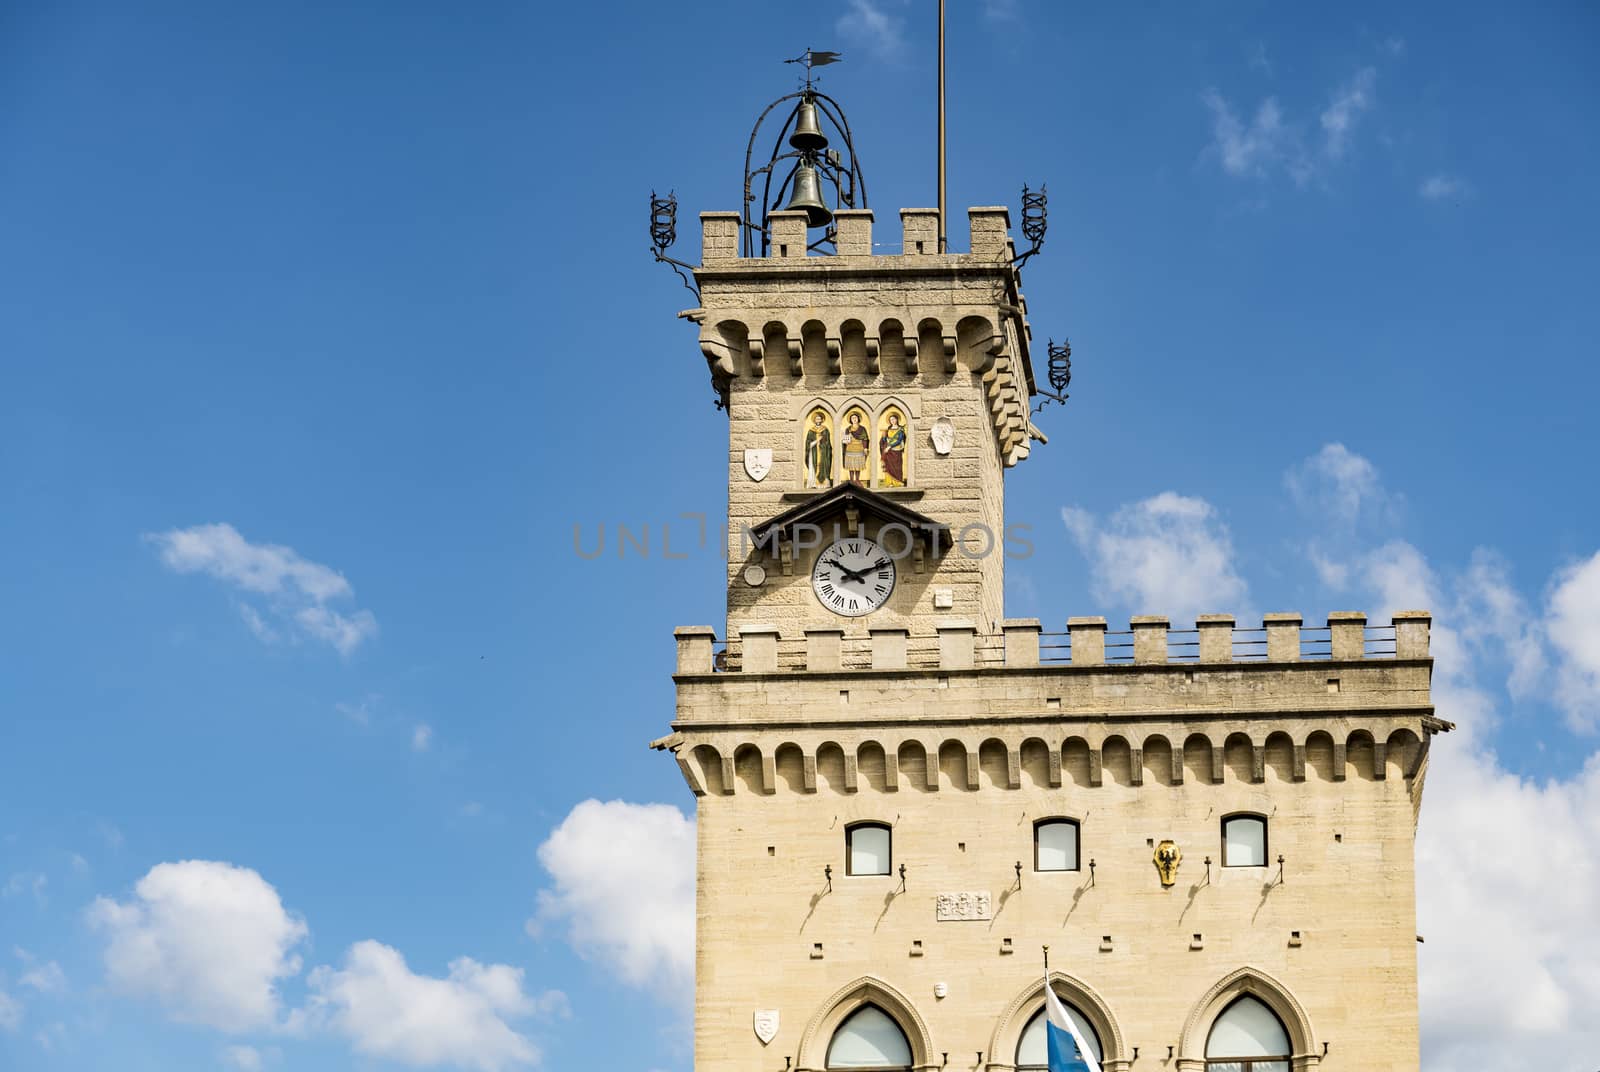 San Marino - June 18: Central square of San Marino with the Public Palace and statue of Liberty on June 18, 2017 in Sam Marino Republic